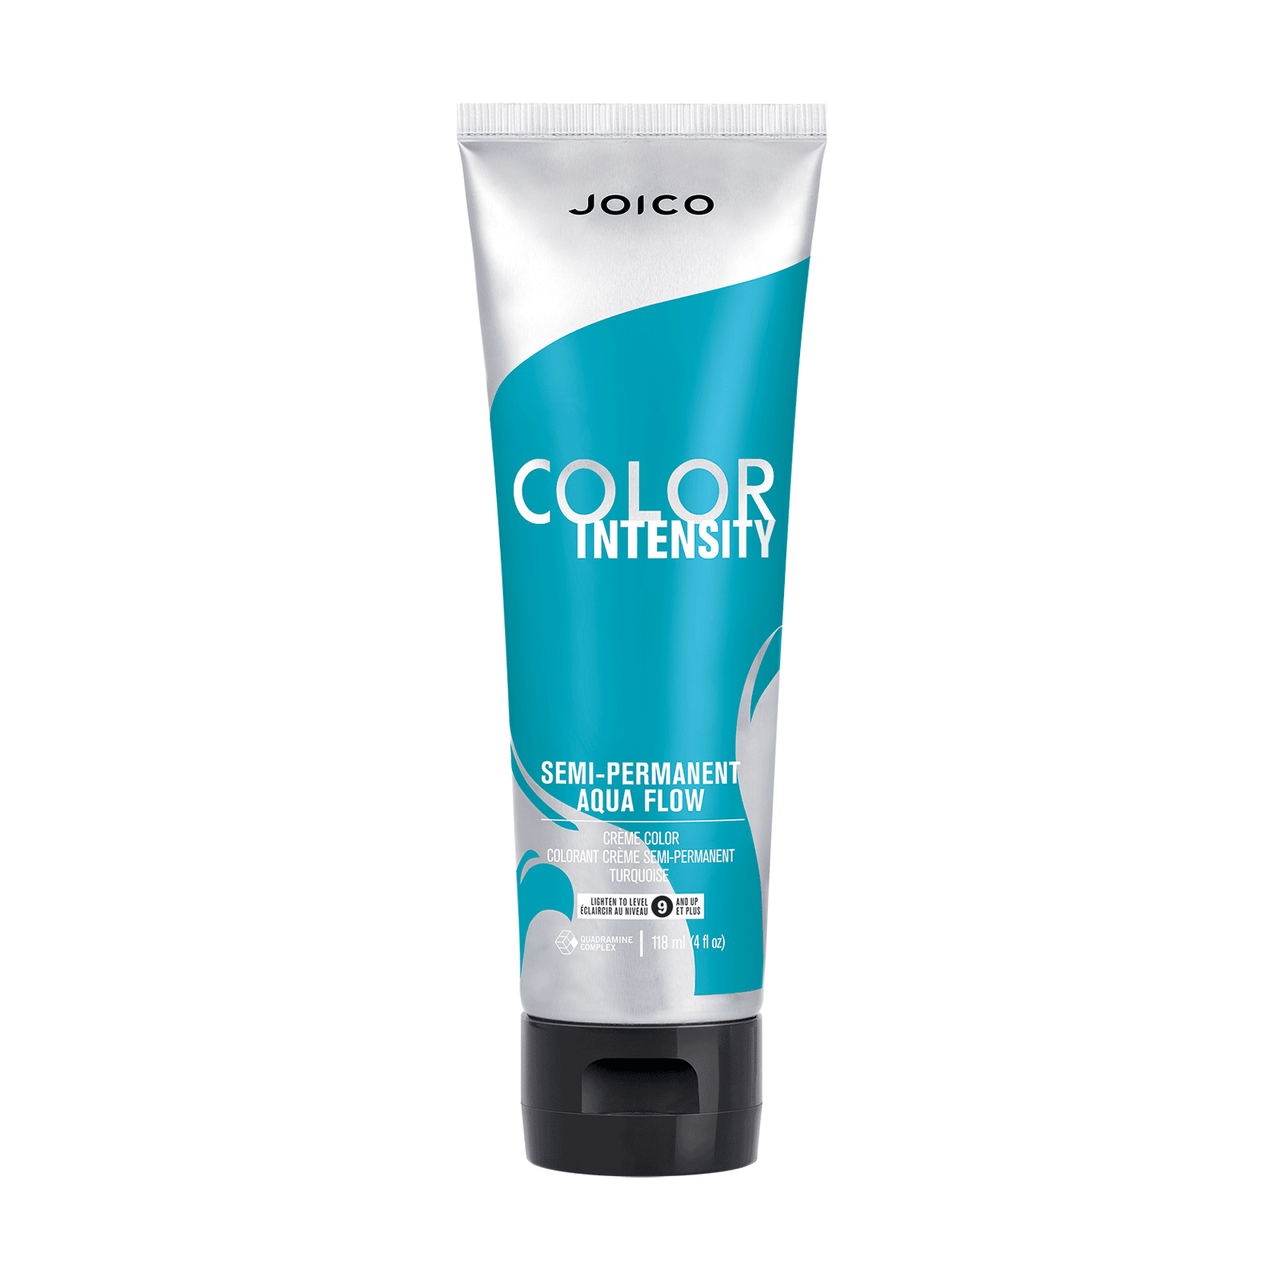 JOICO - COLOR INTENSITY_Color Intensity Aqua Flow_Cosmetic World